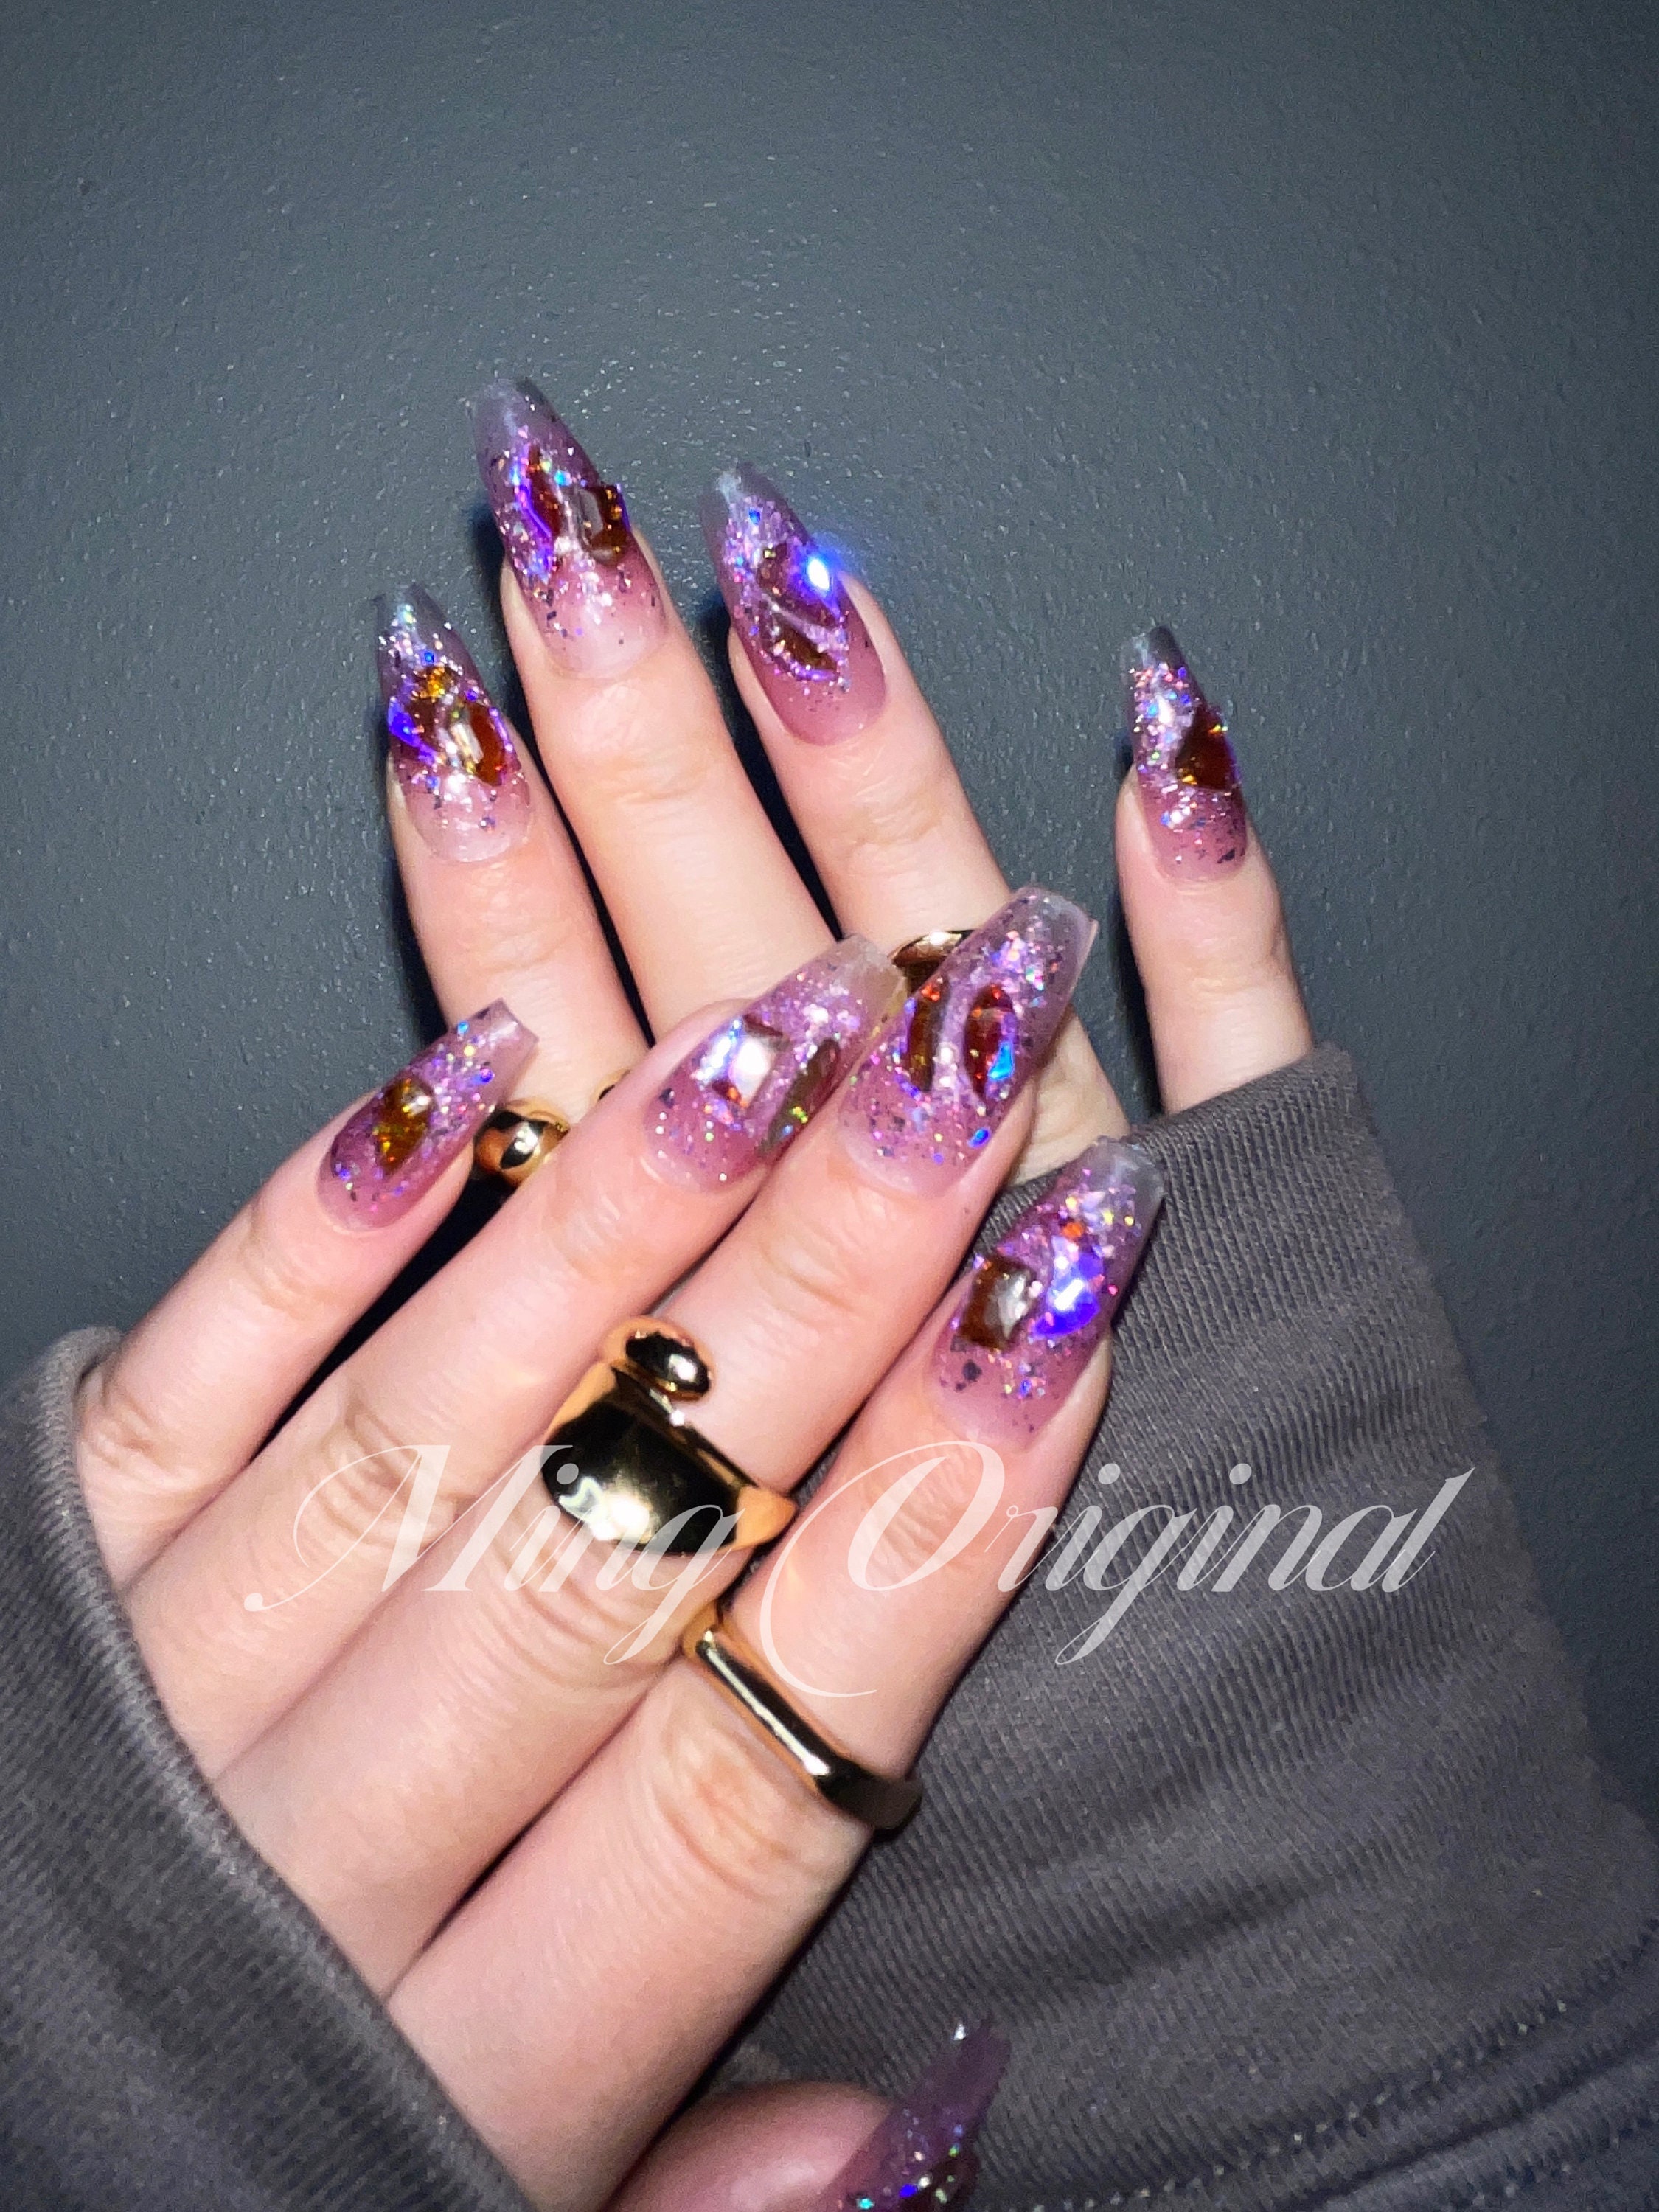 Crystal heart nail art with butterfly and glitter encapsulation. 